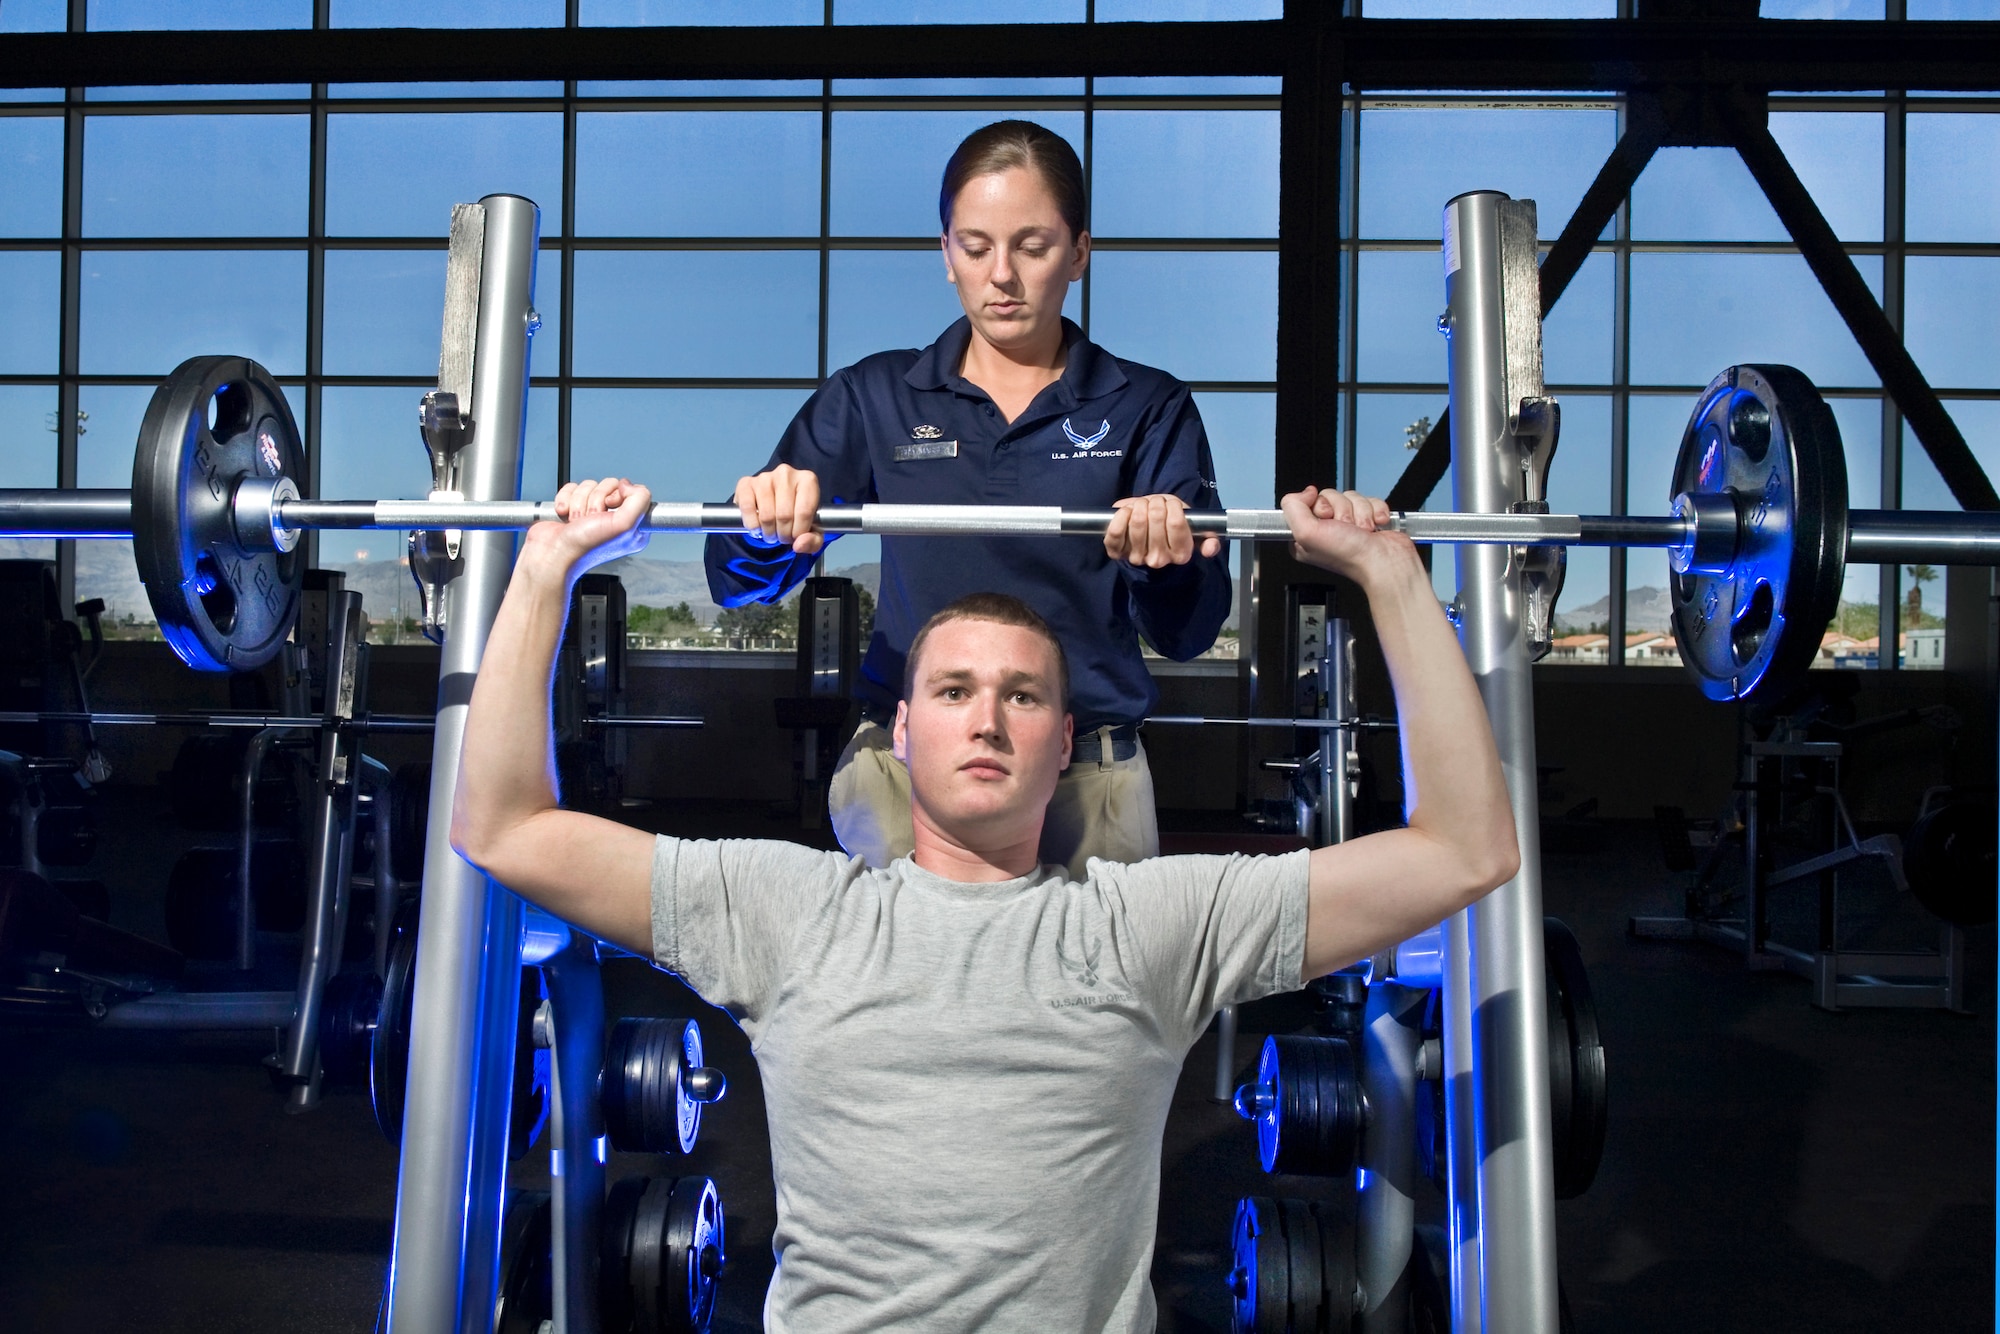 U.S. Air Force Senior Airman Whitney Massey, 99th Force Support Squadron services journeyman, spots Airman 1st Class Benjamin Hurst on the free weights at the Warrior Fitness Center April 2, 2012, at Nellis Air Force Base, Nev. The state-of-the-art facility's strength training equipment offers Magnum, Nautilus Hammer Strength, Free Motion and Hampton Rubber Bumper Plates training.  (U.S. Air Force photo by Lawrence Crespo)